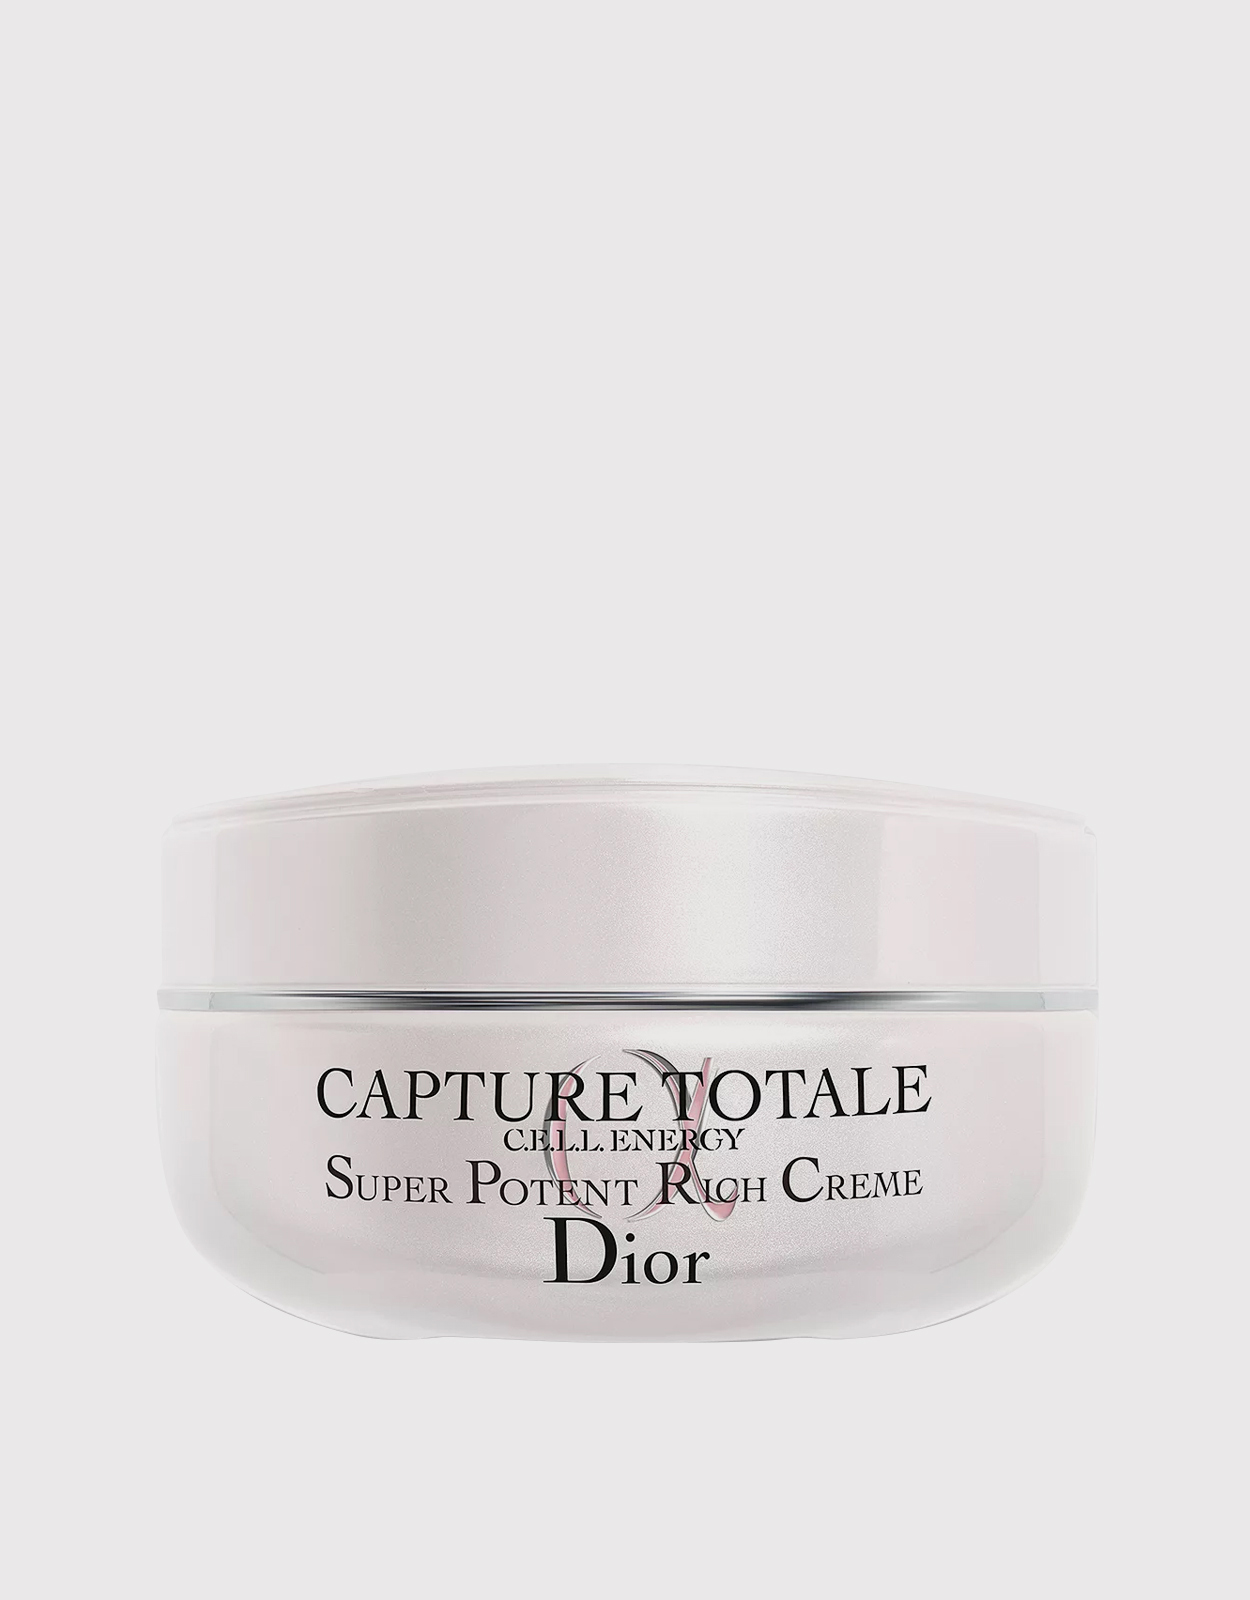 Capture Totale Capture Totale Intensive Restorative Night Creme face and  neck  Refill by DIOR  Buy online  parfumdreams